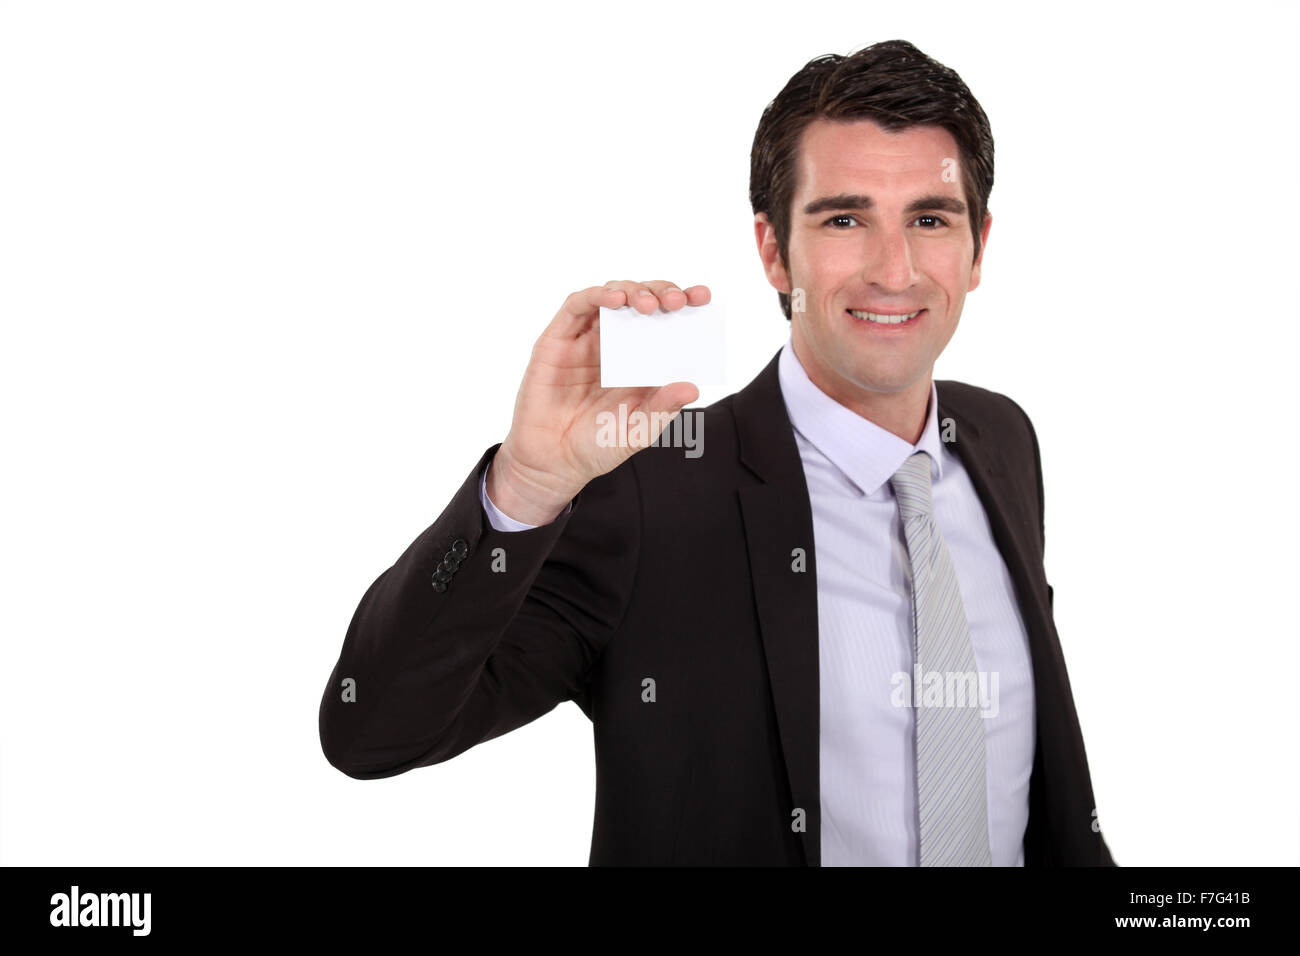 Businessman holding up hiscard Stock Photo